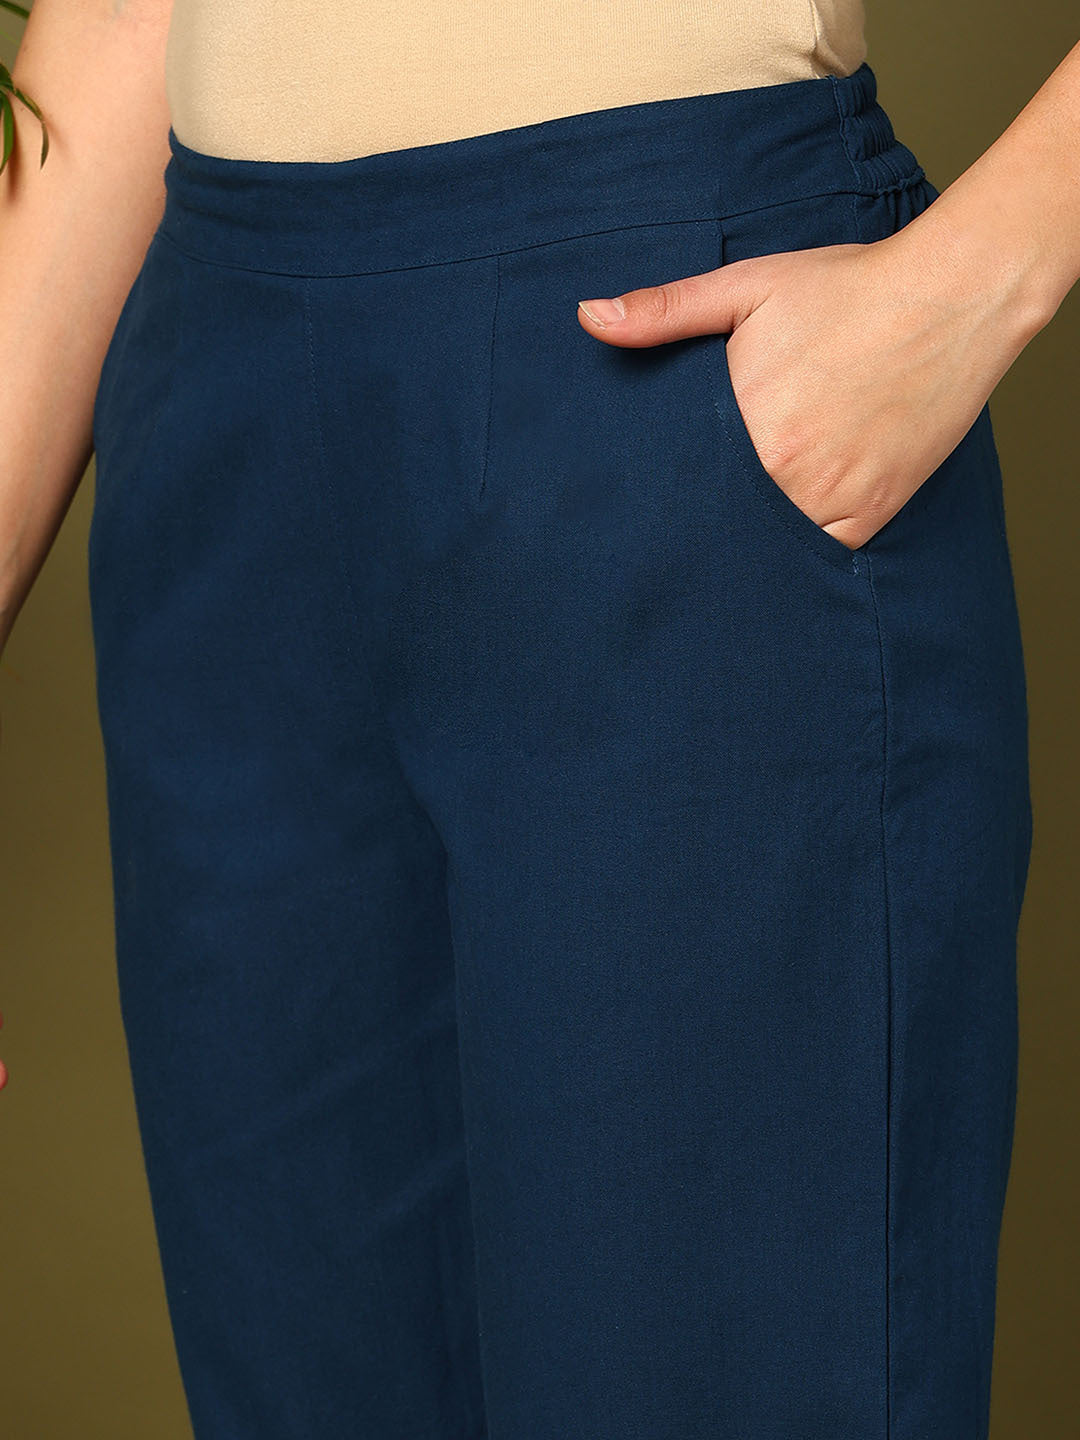 Buy Shubham exports Women cigarette Pants/Stretchable Pants for Women Navy  Blue Color Size- XL (28) Online In India At Discounted Prices